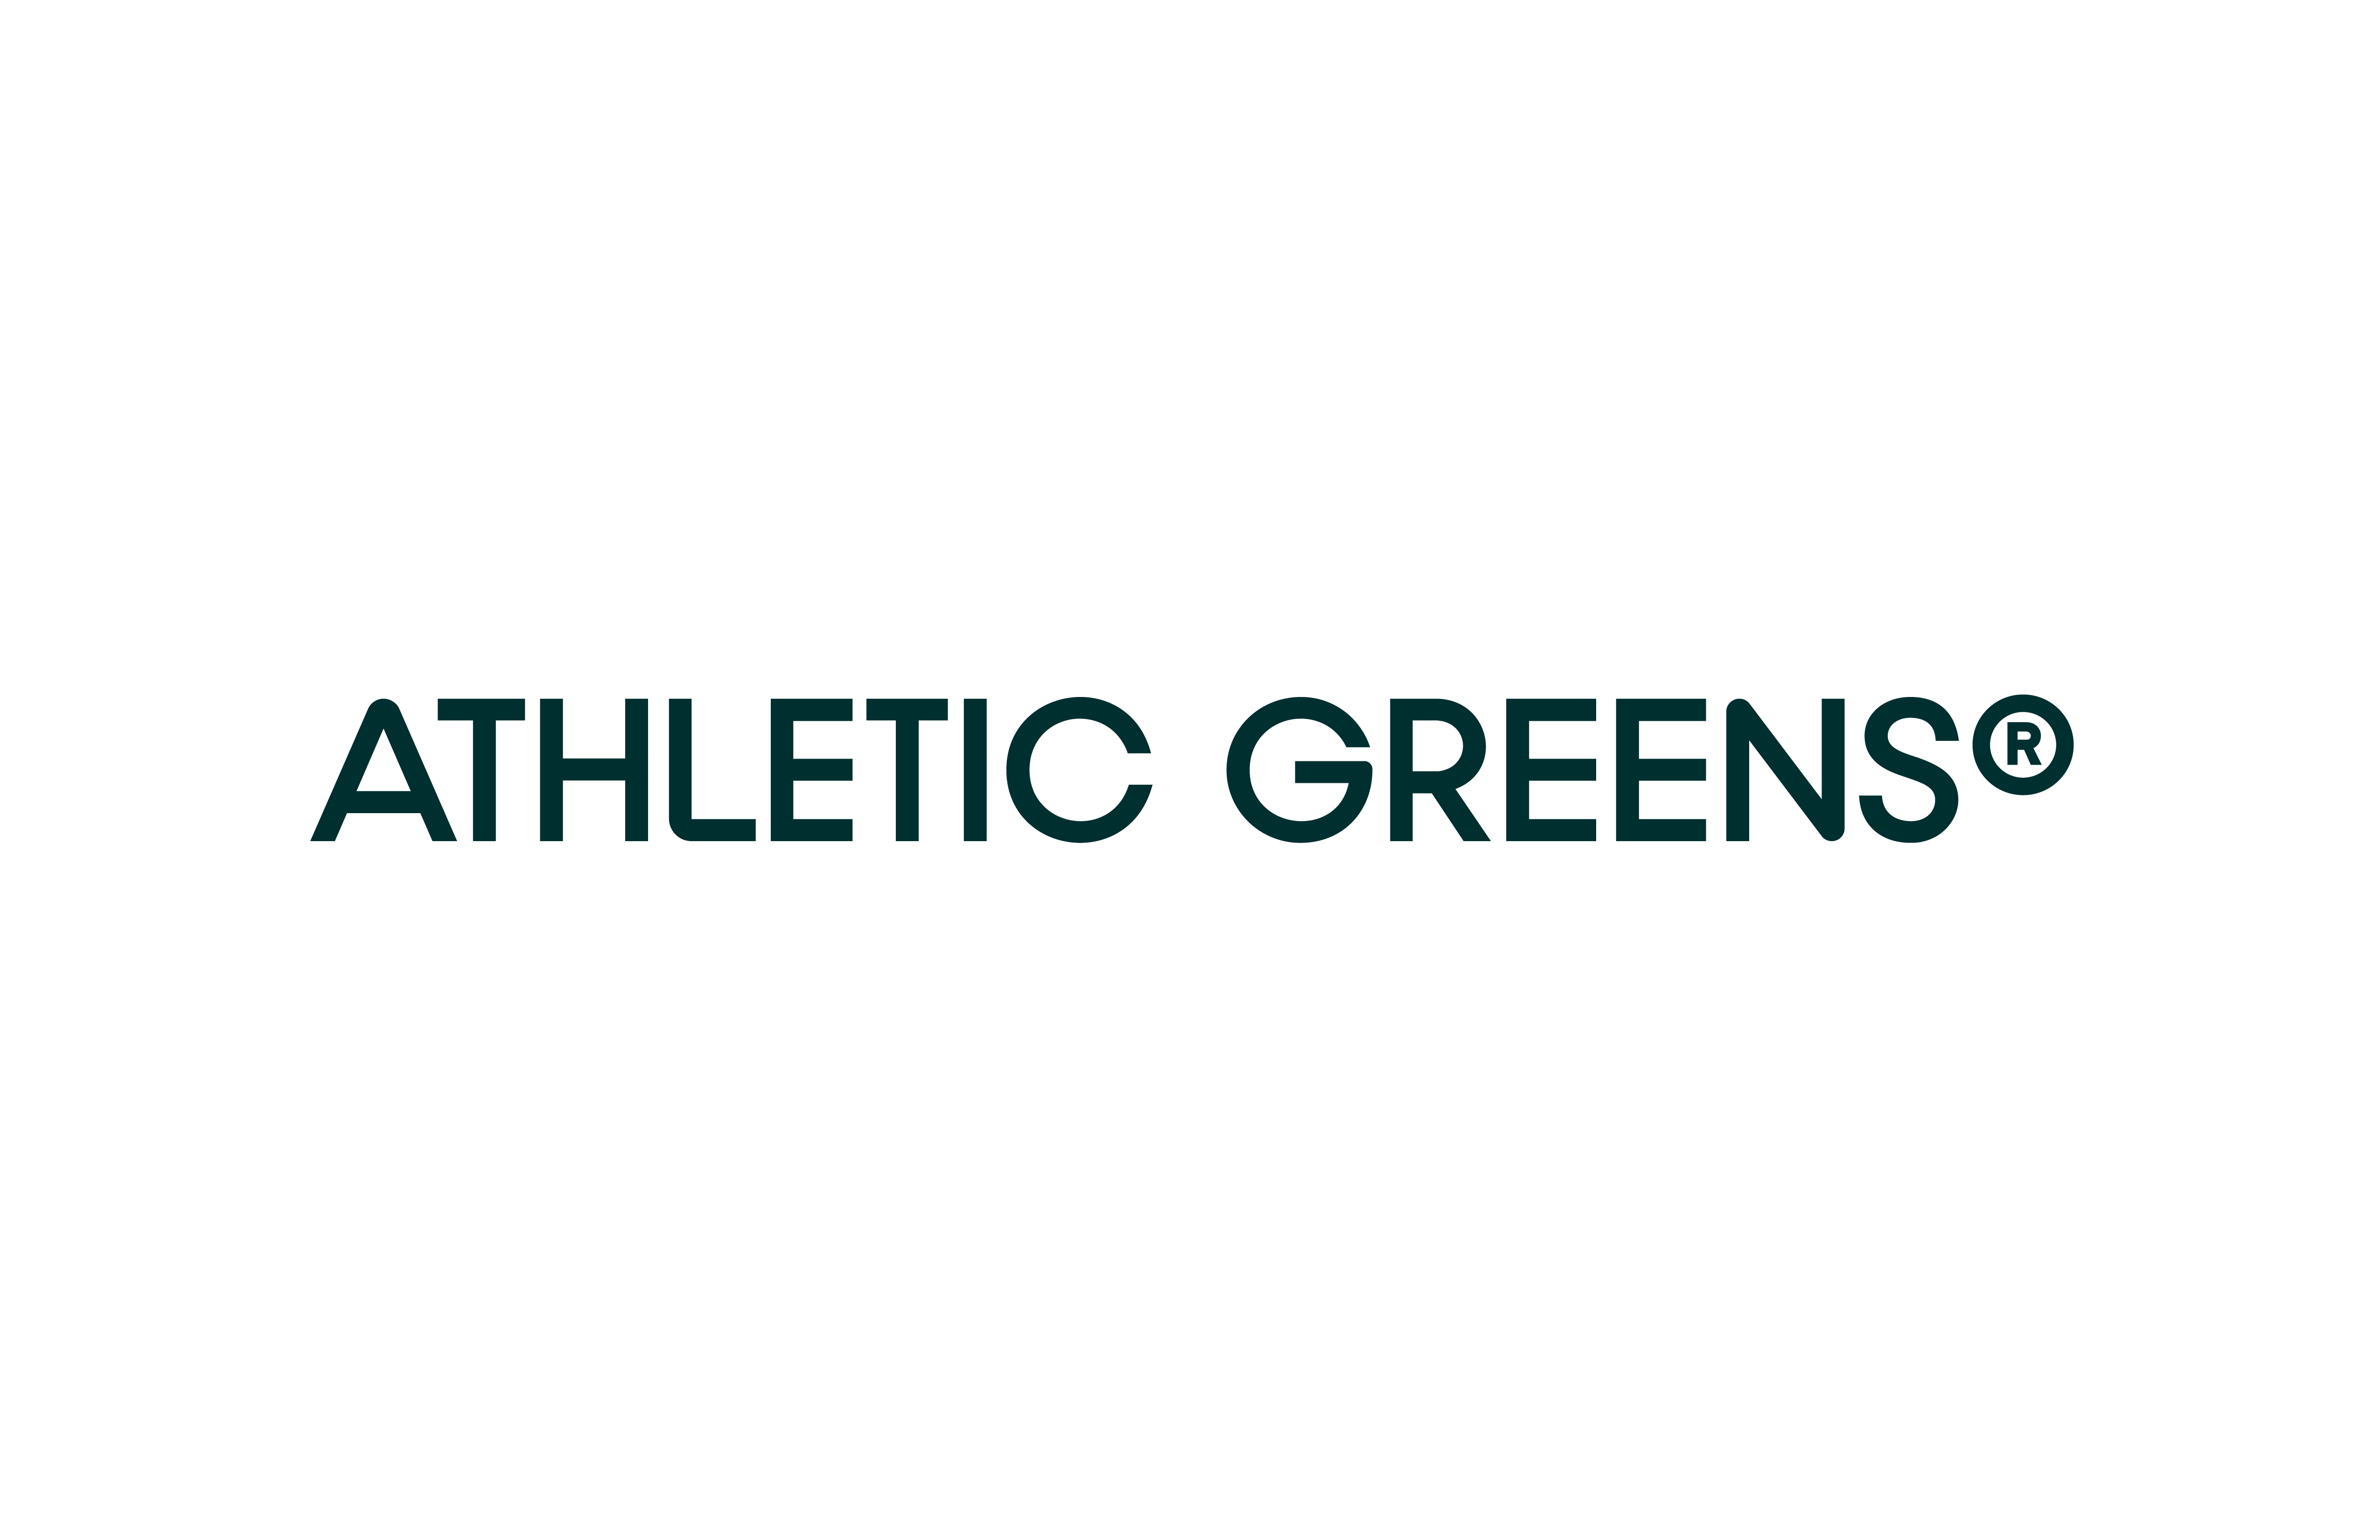  Athletic Greens Ultimate Daily, Whole Food Sourced All